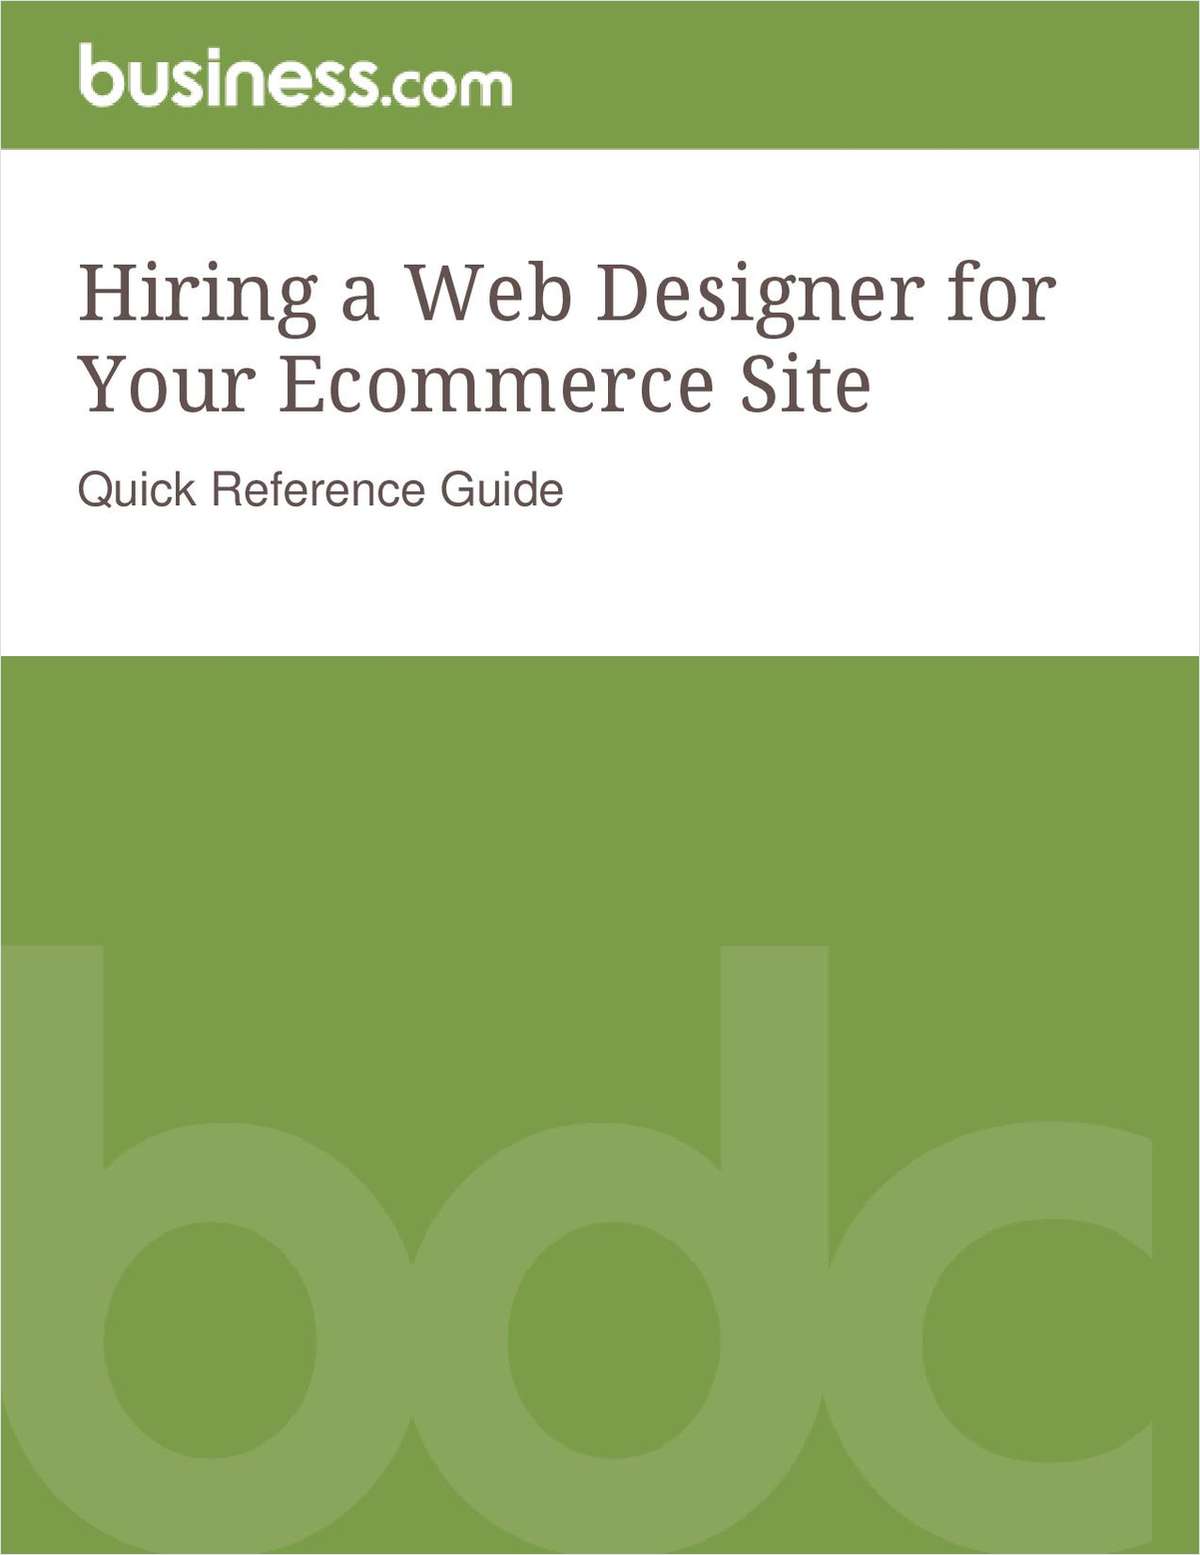 Hiring a Web Designer for Your Ecommerce Site